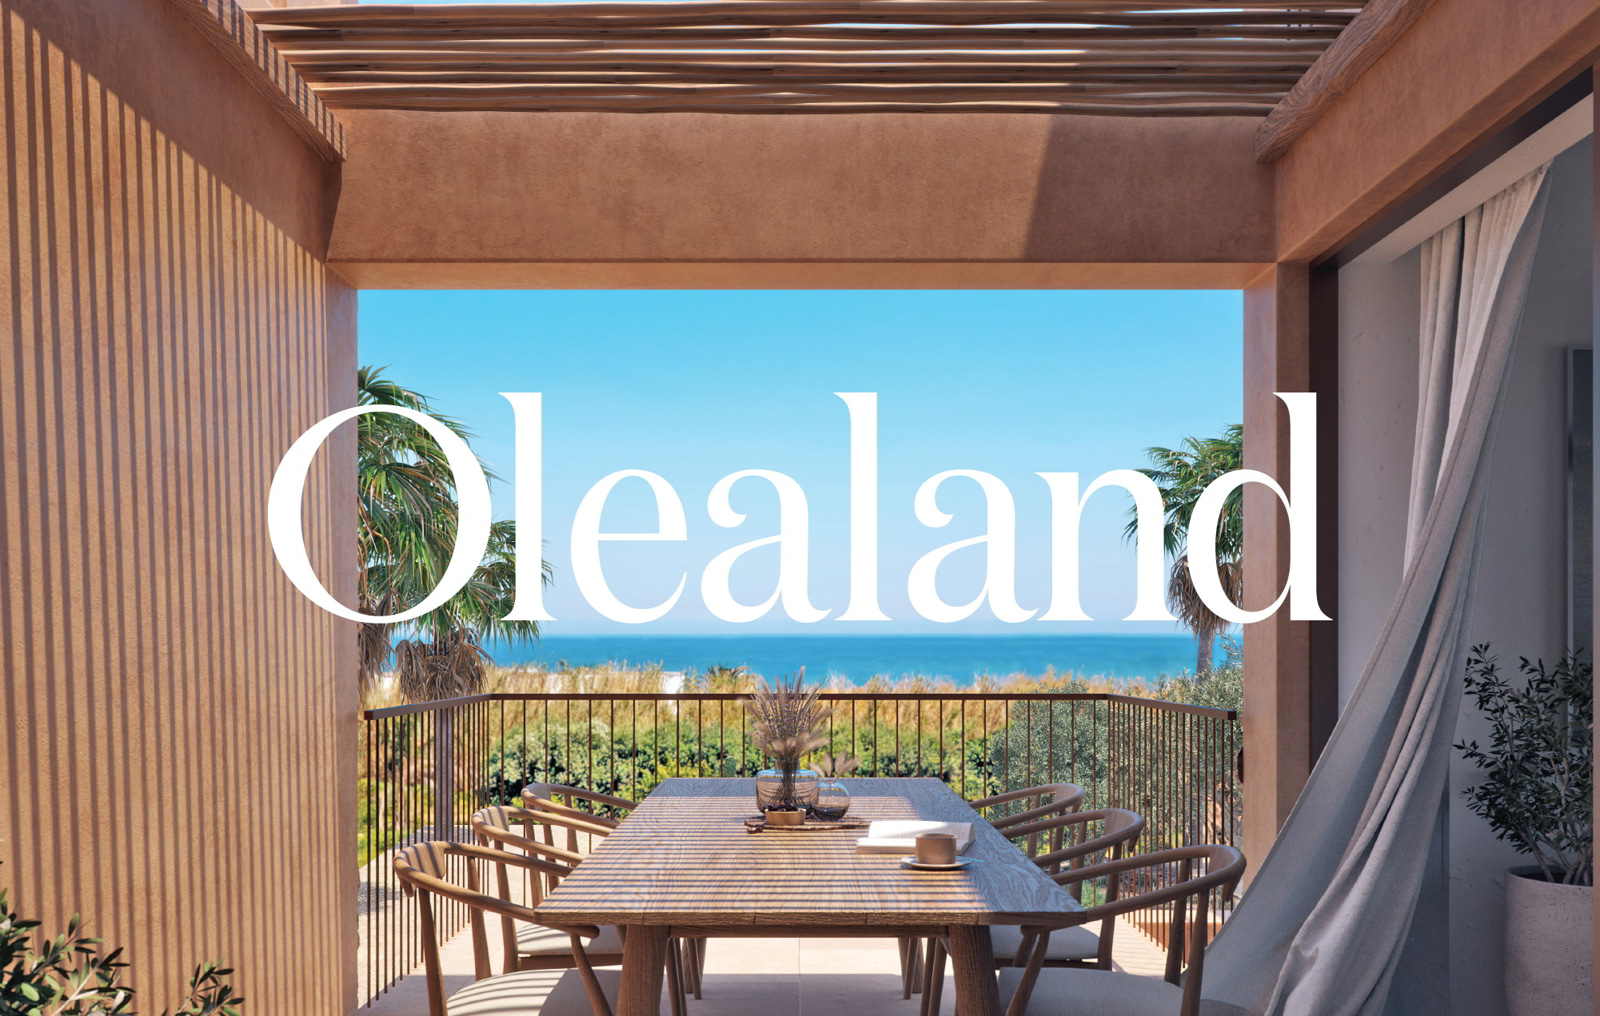 Archisearch Olealand, cultivating an identity for a residential project in Crete | by AVAX Development